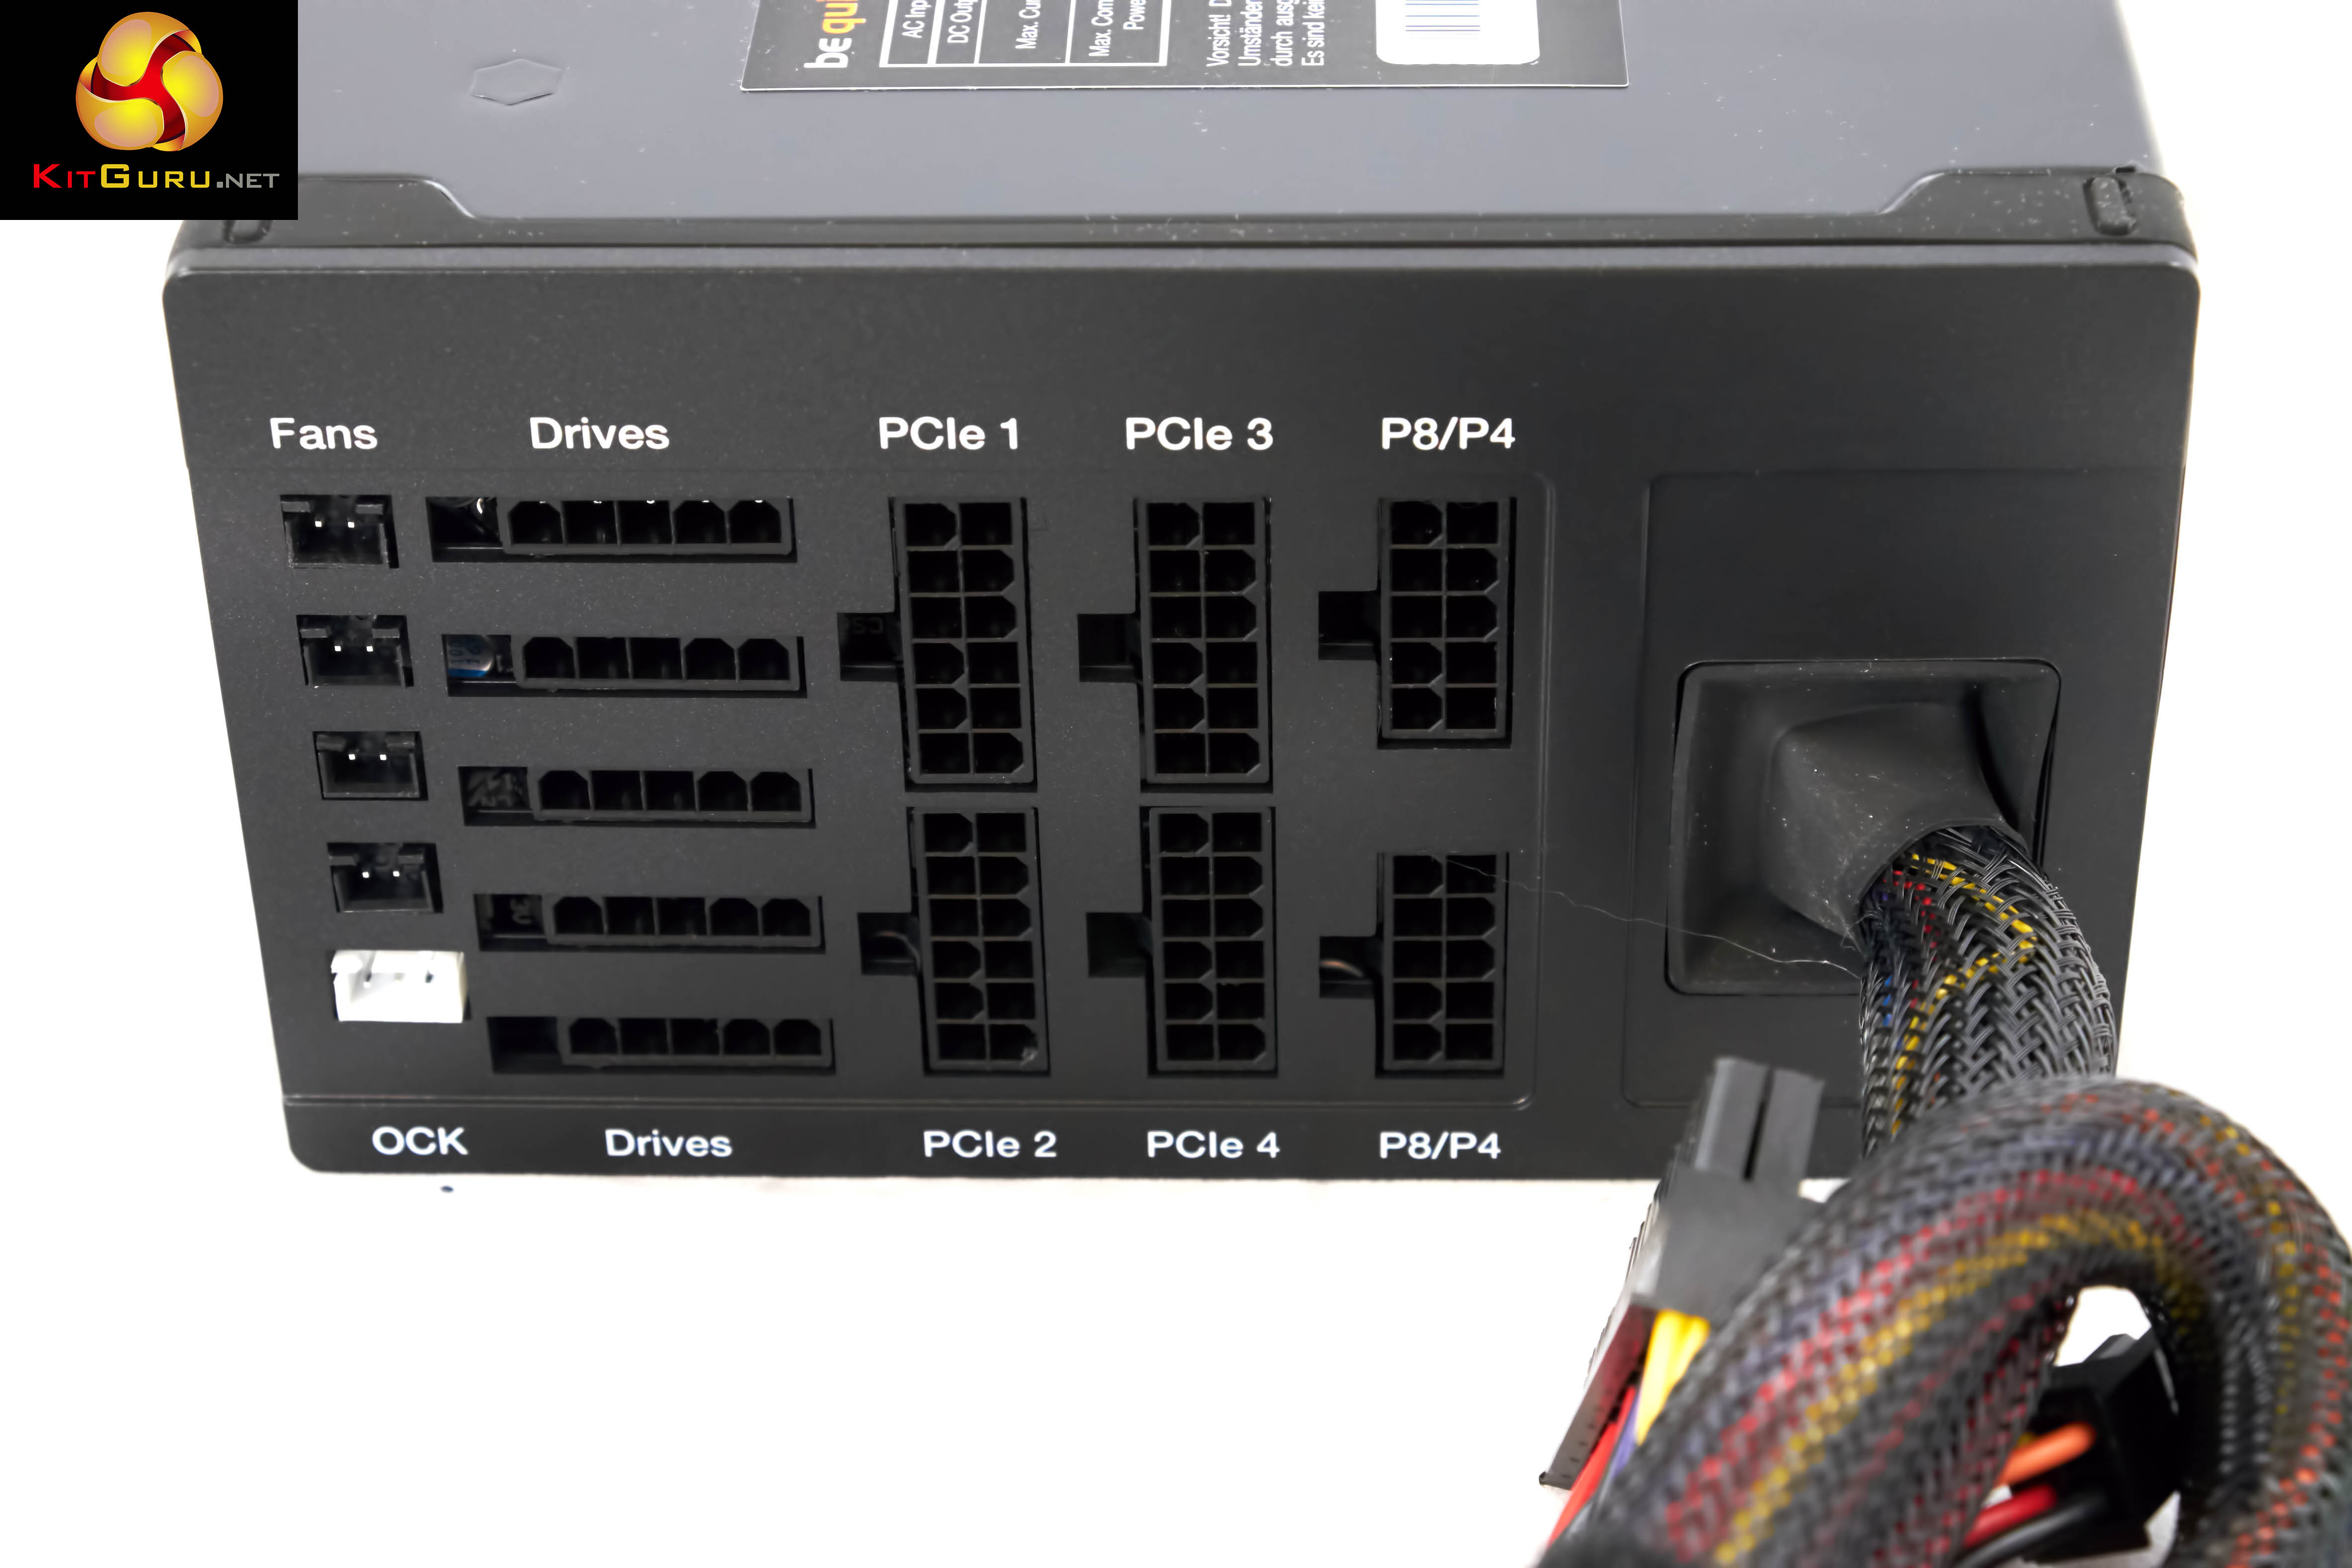 be quiet! Dark Power Pro 11 750W PSU Review - PC Perspective